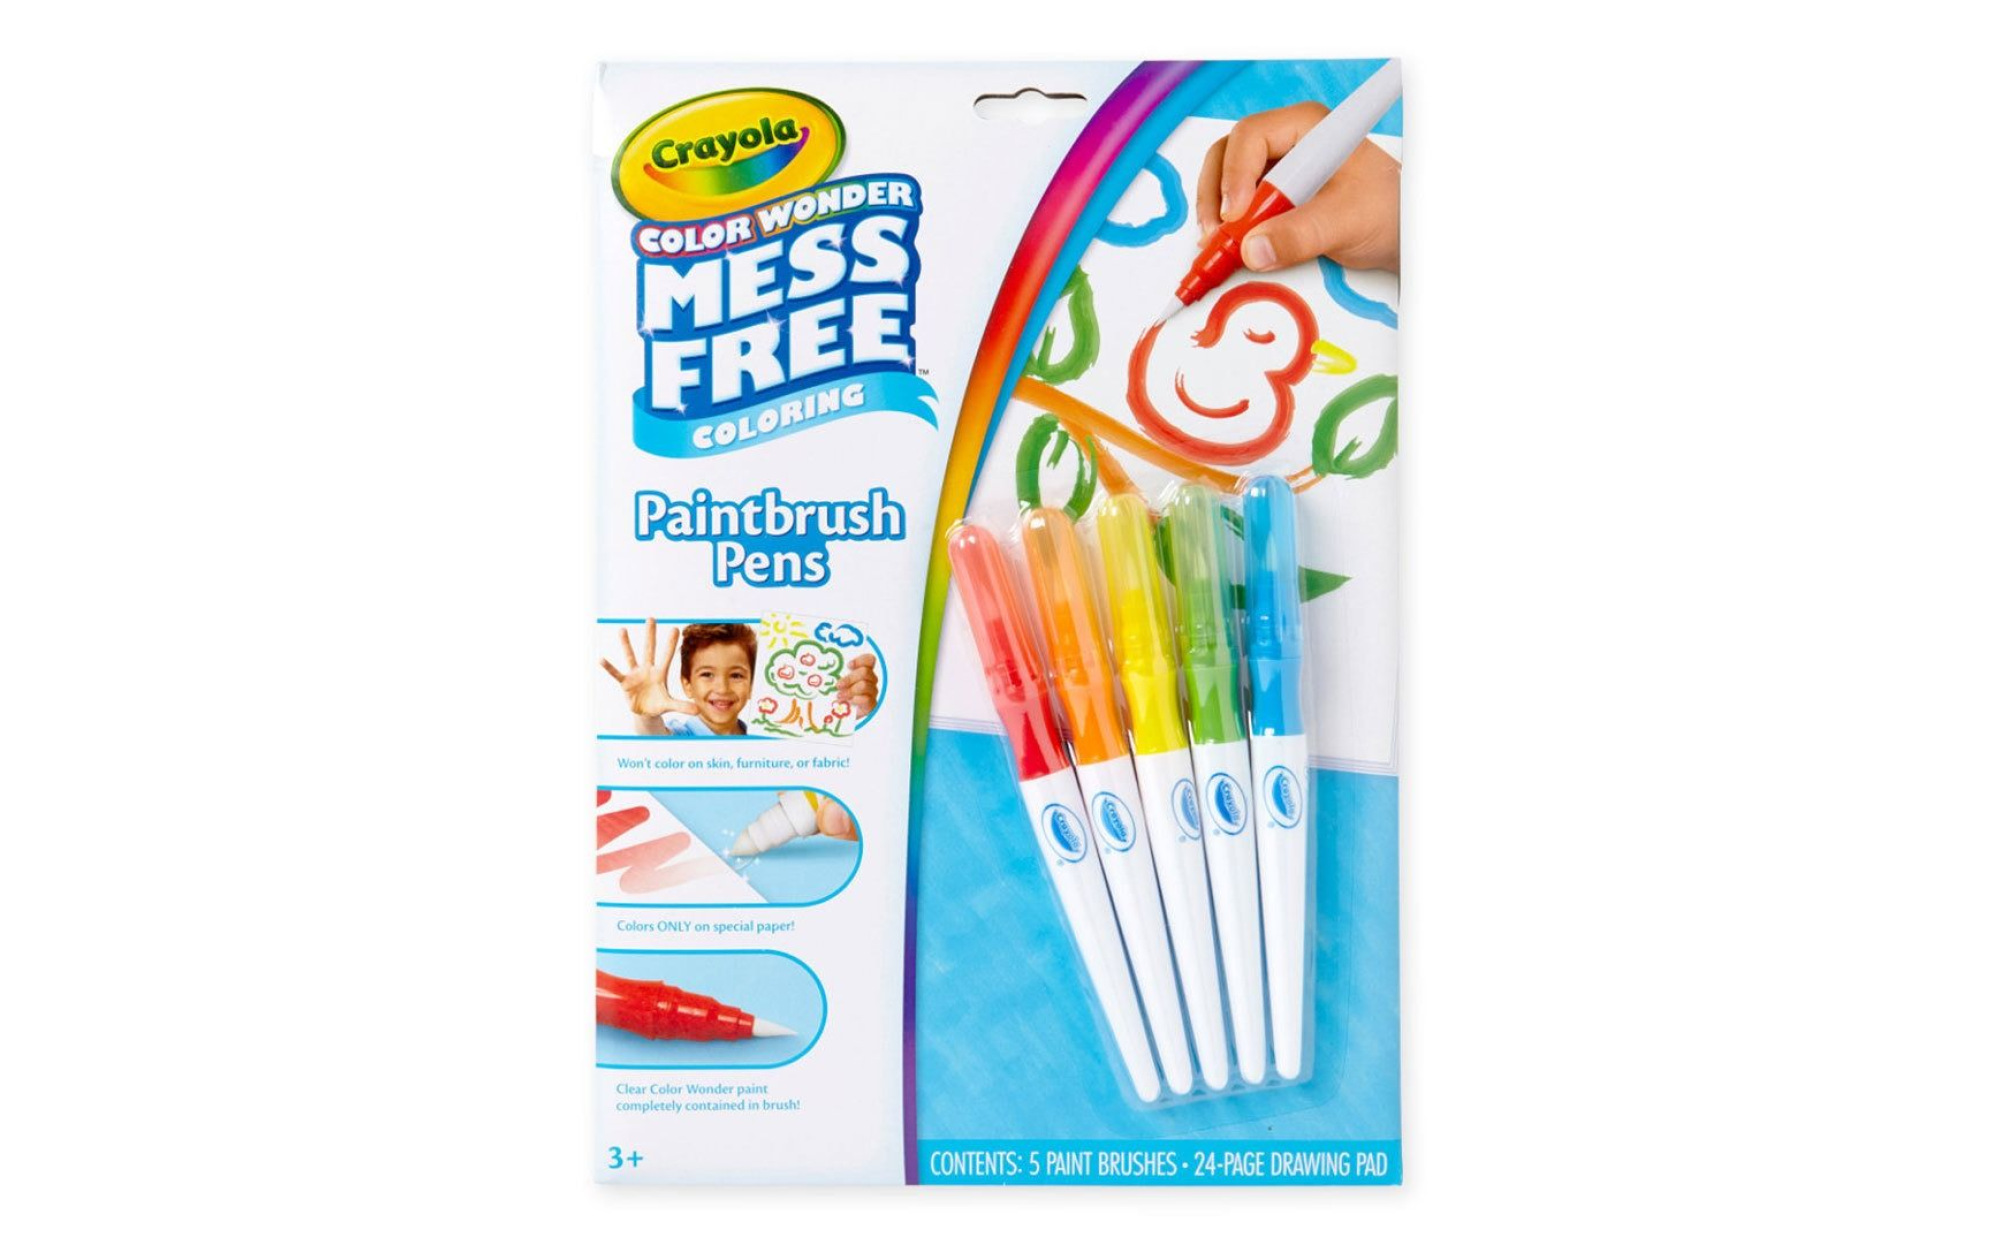 Crayola Color Wonder Mess Free Paintbrush Pens & Paper – Art Therapy